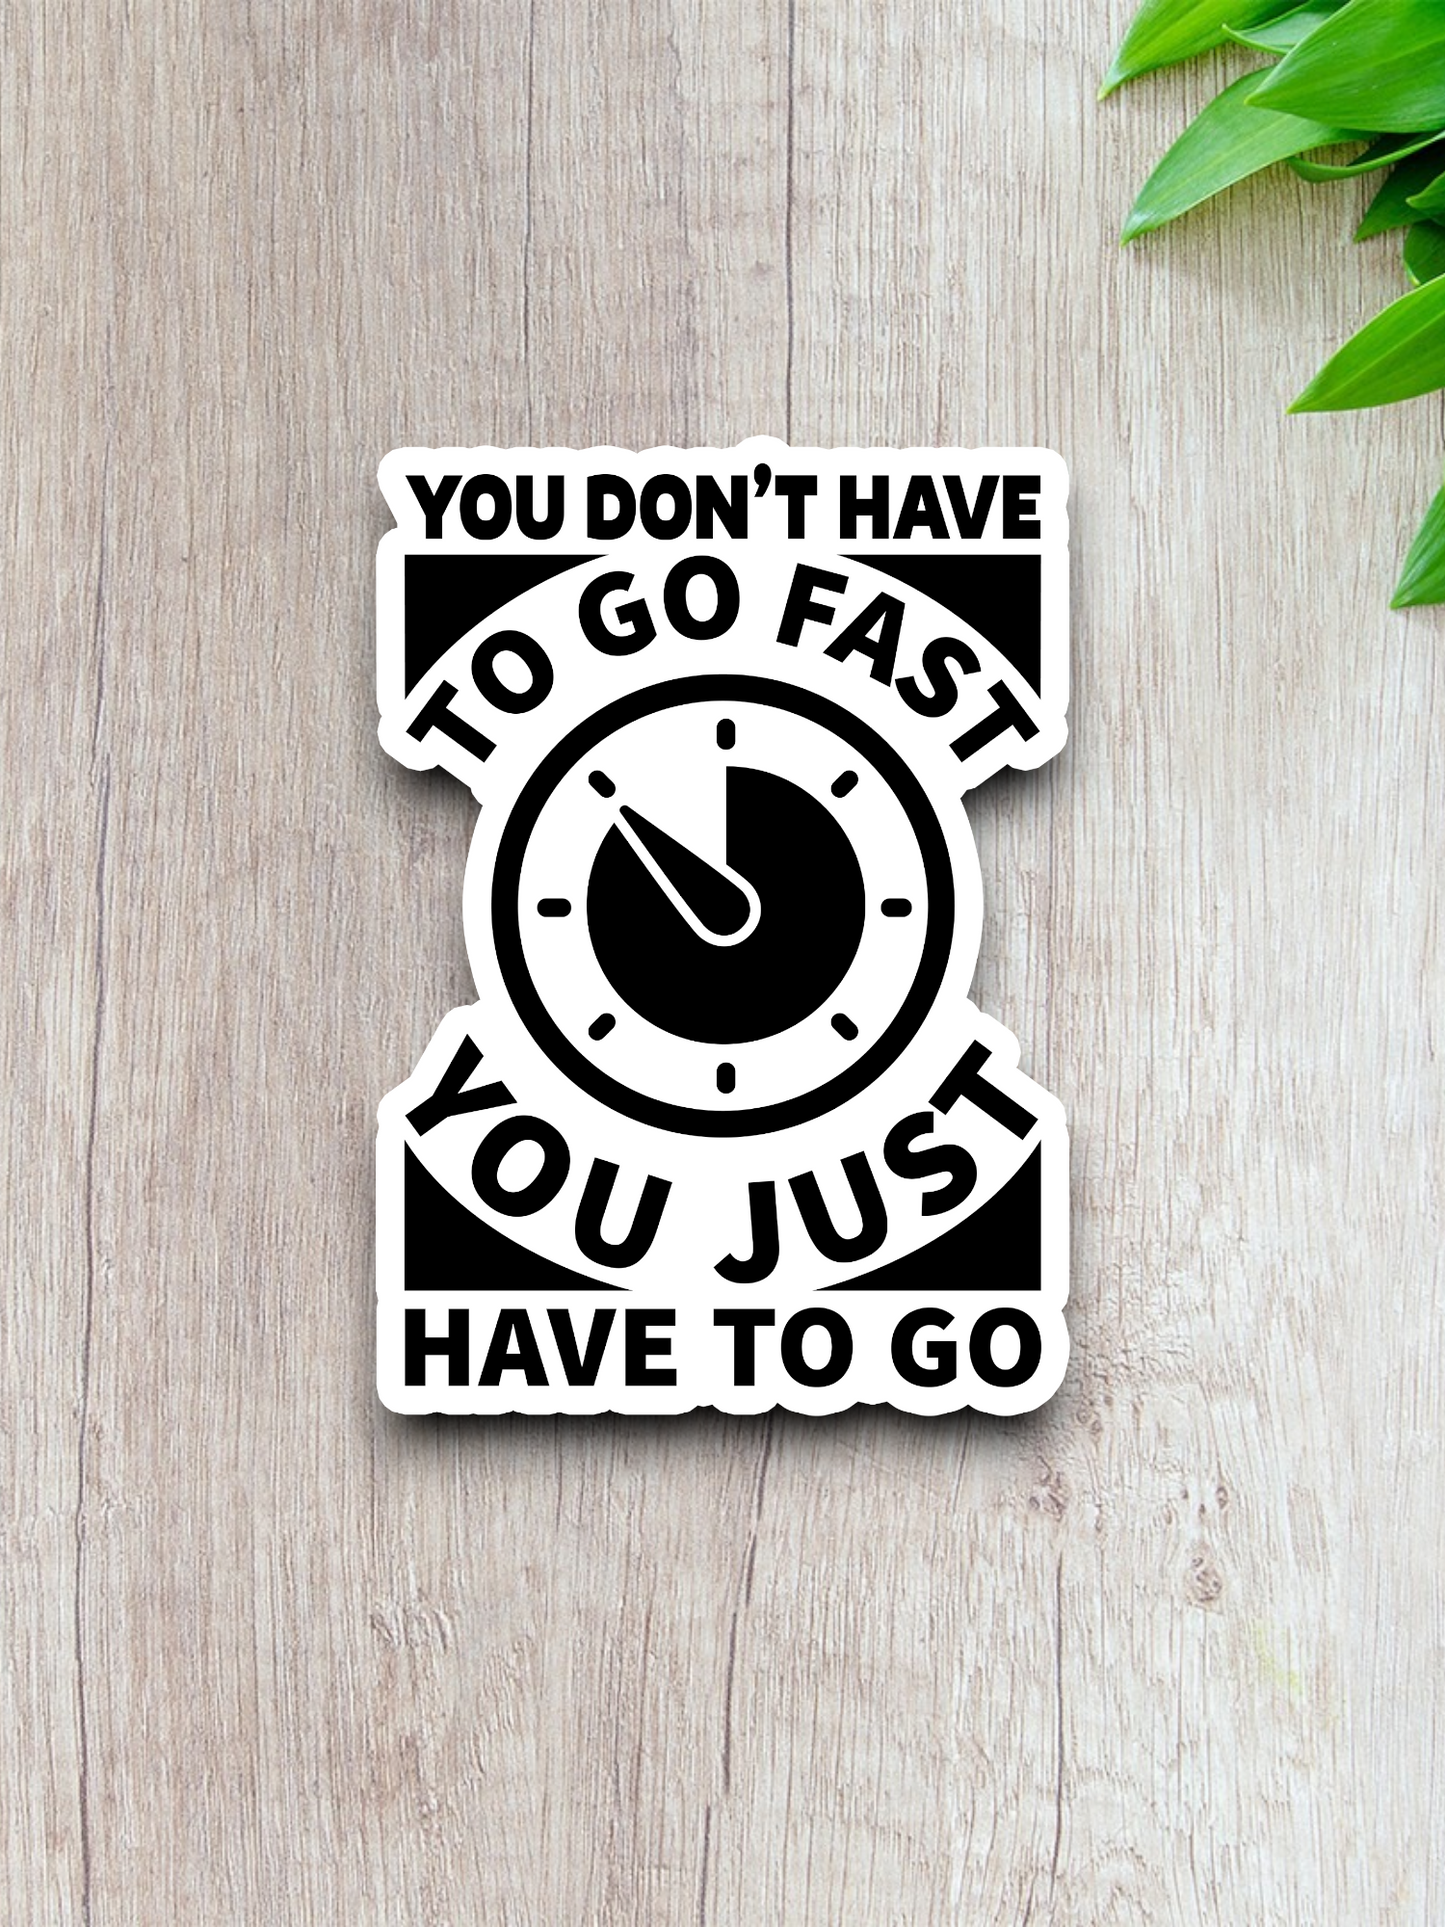 You Don't Have to Go Fast You Just Have to Go Humor Sticker